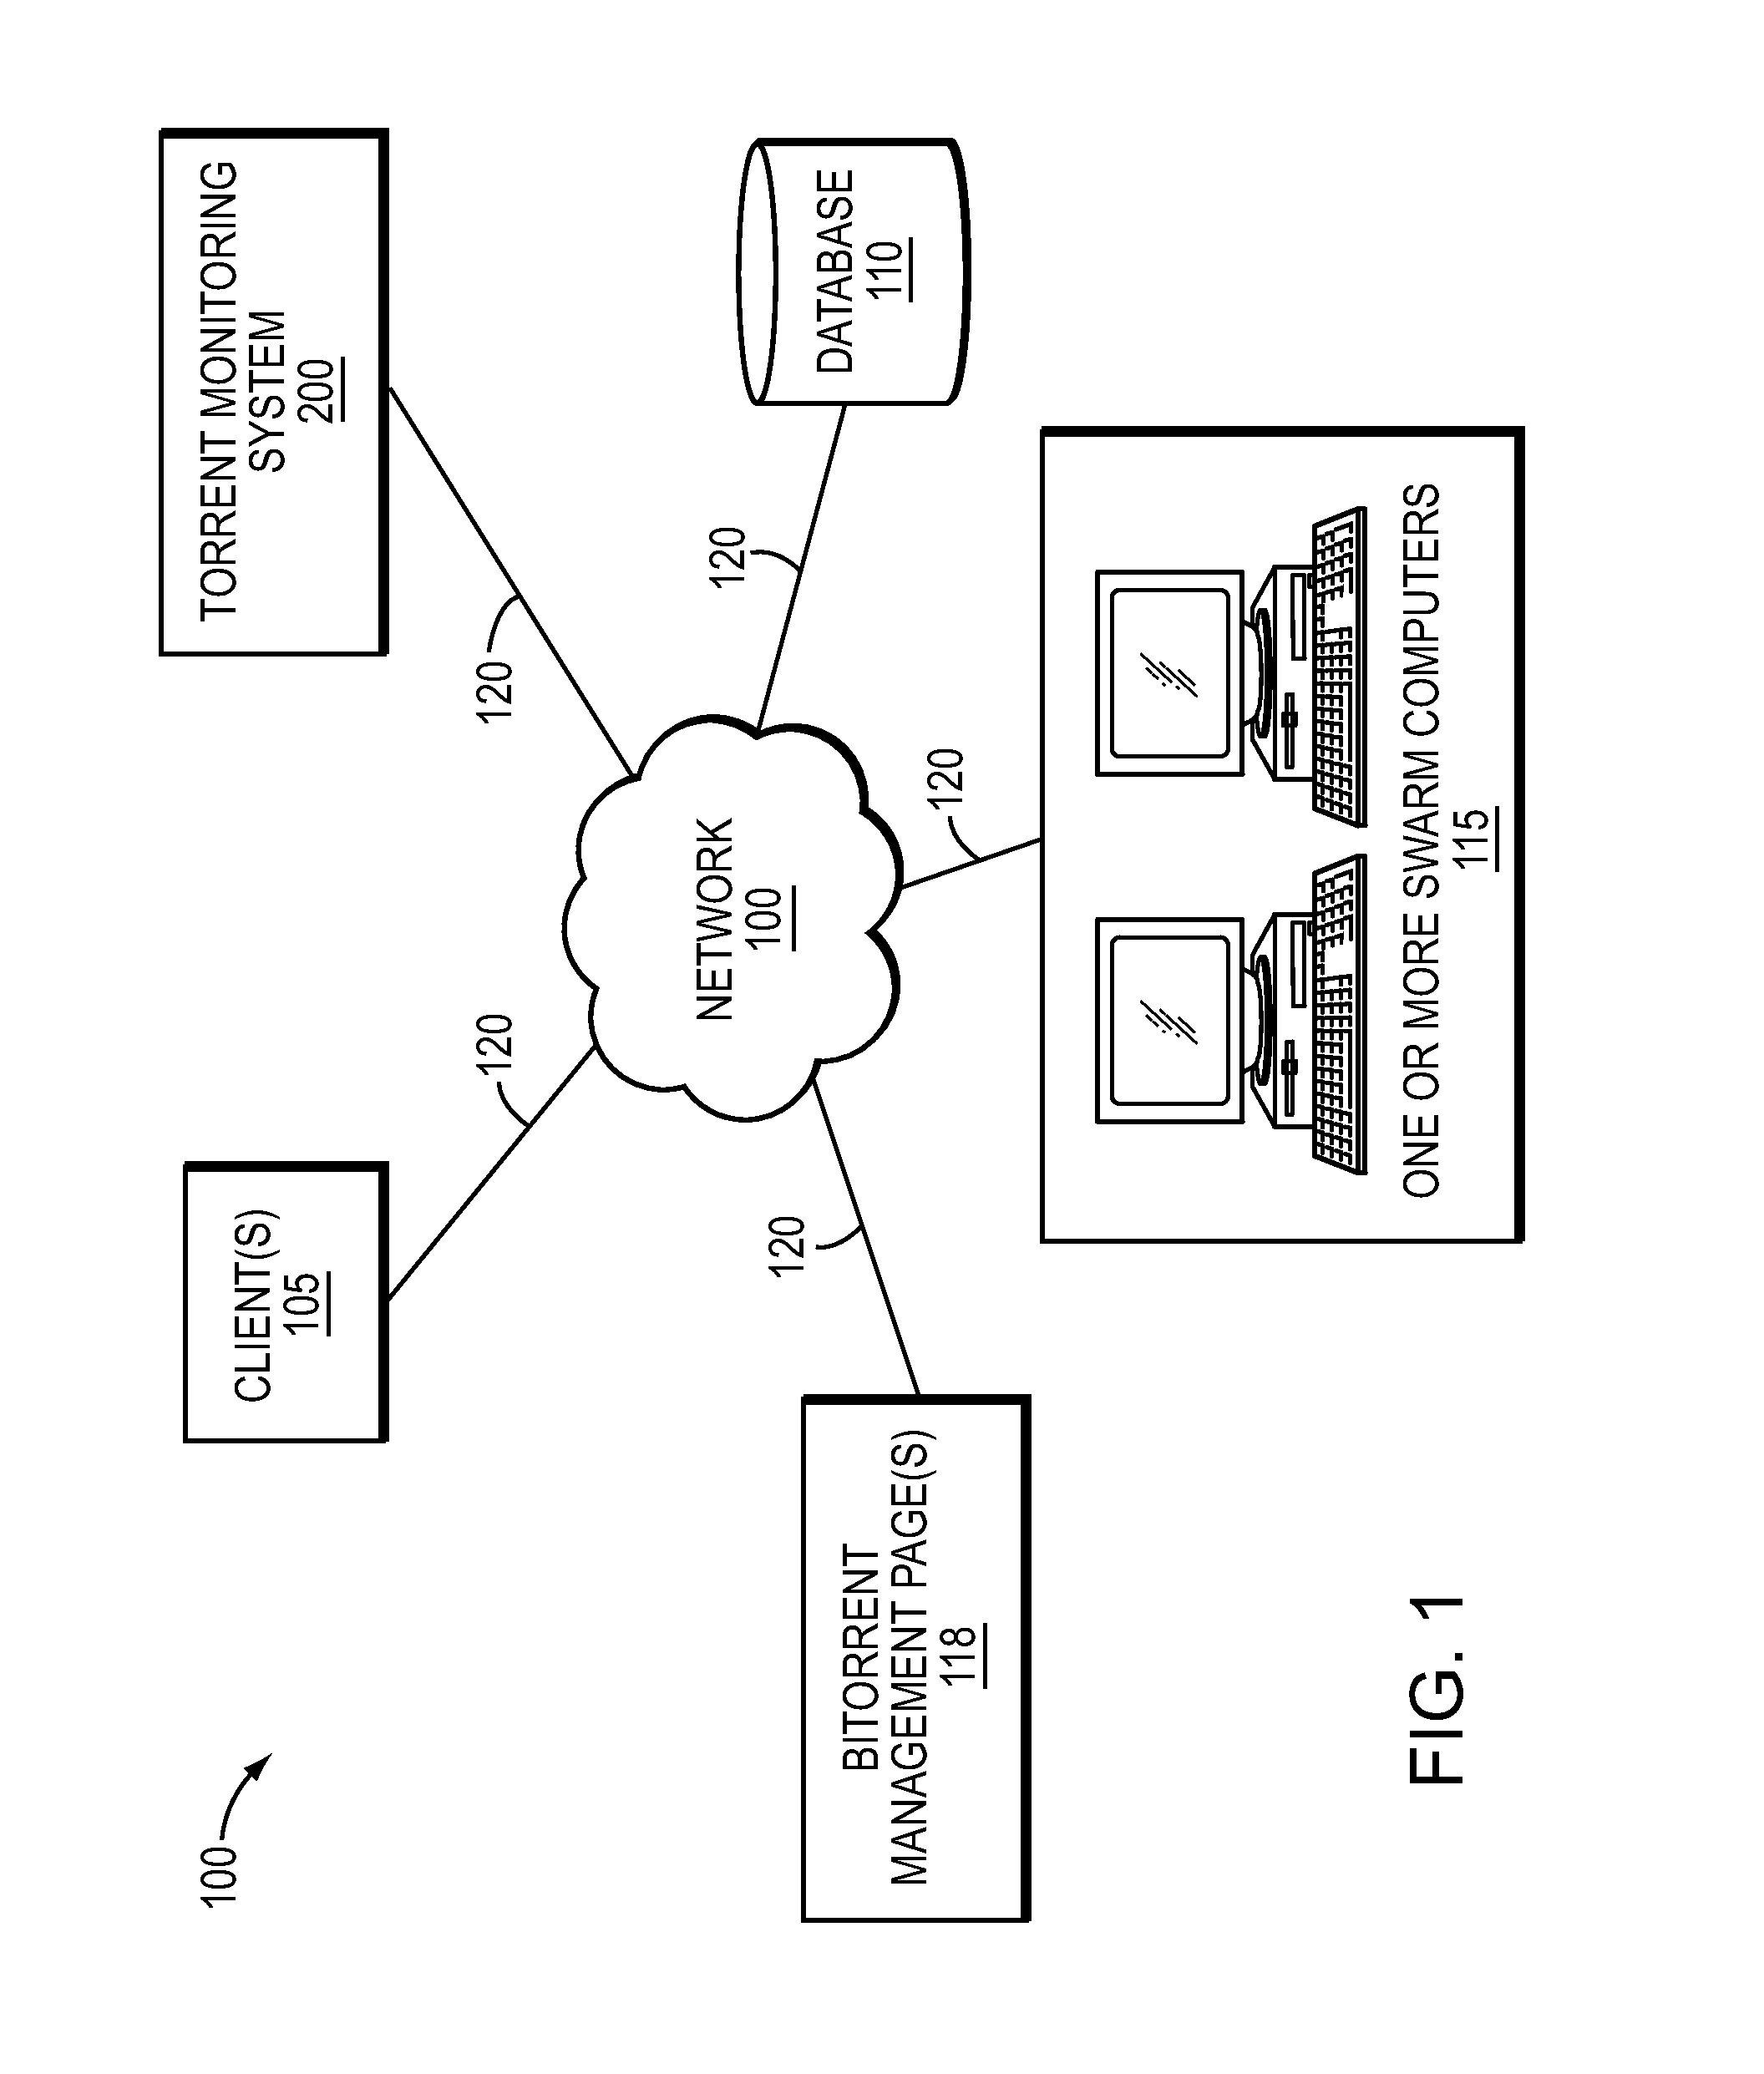 System and method for monitoring bittorrent